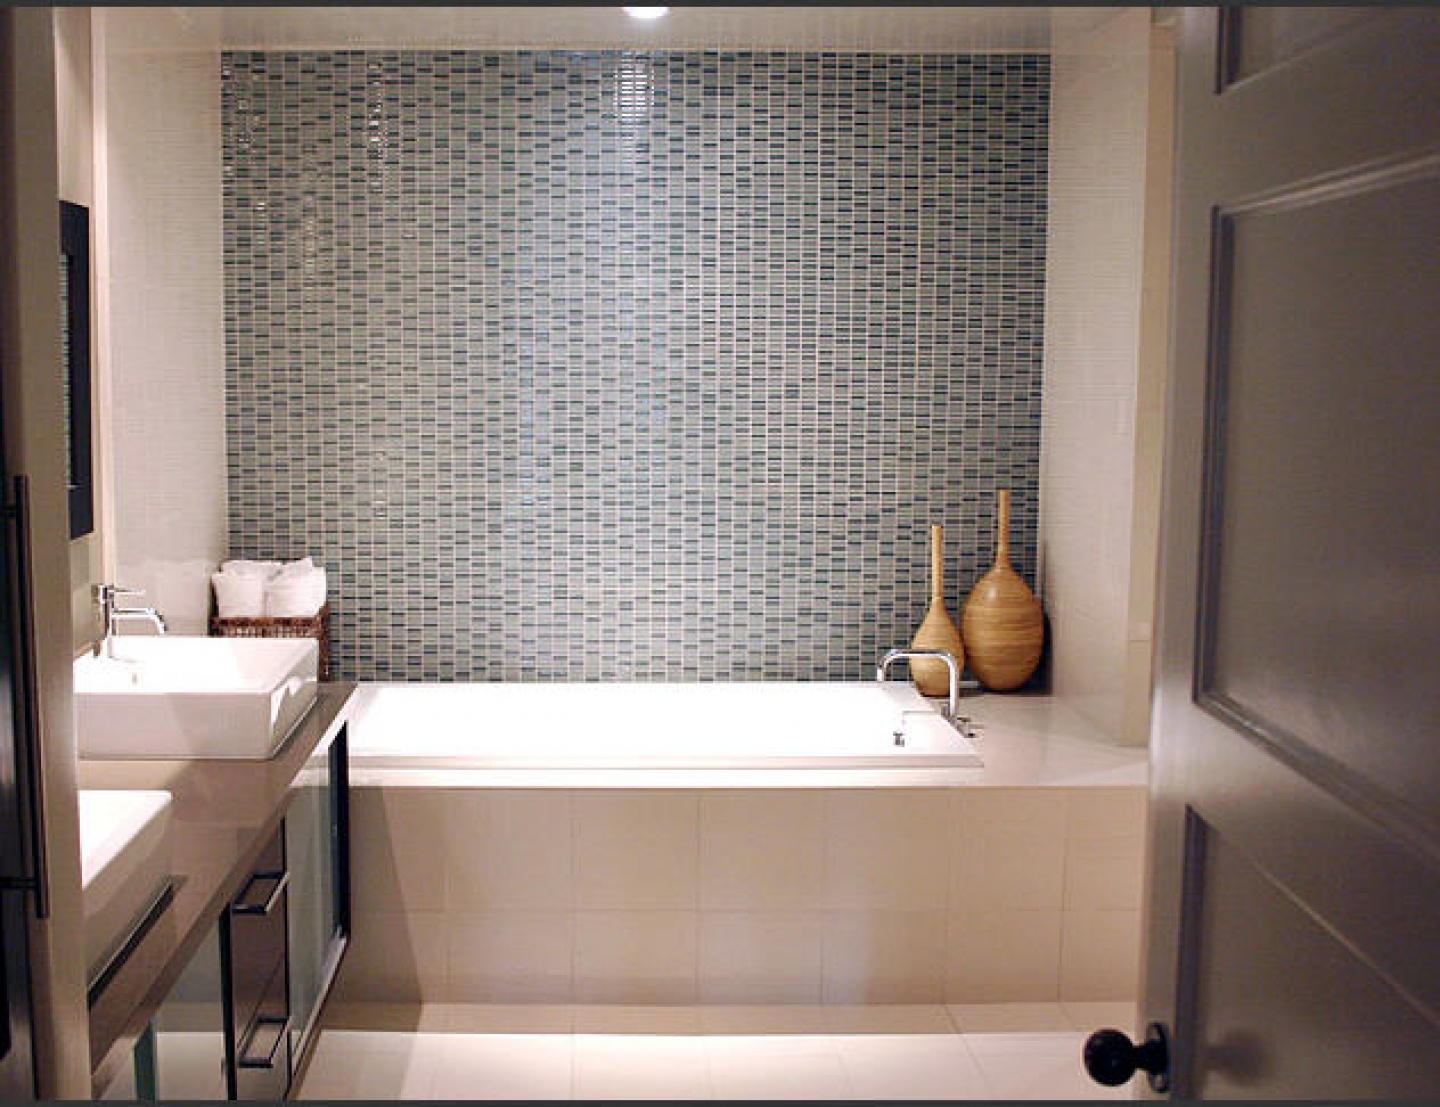 Bathroom Design For Small Space Ideas Spaces